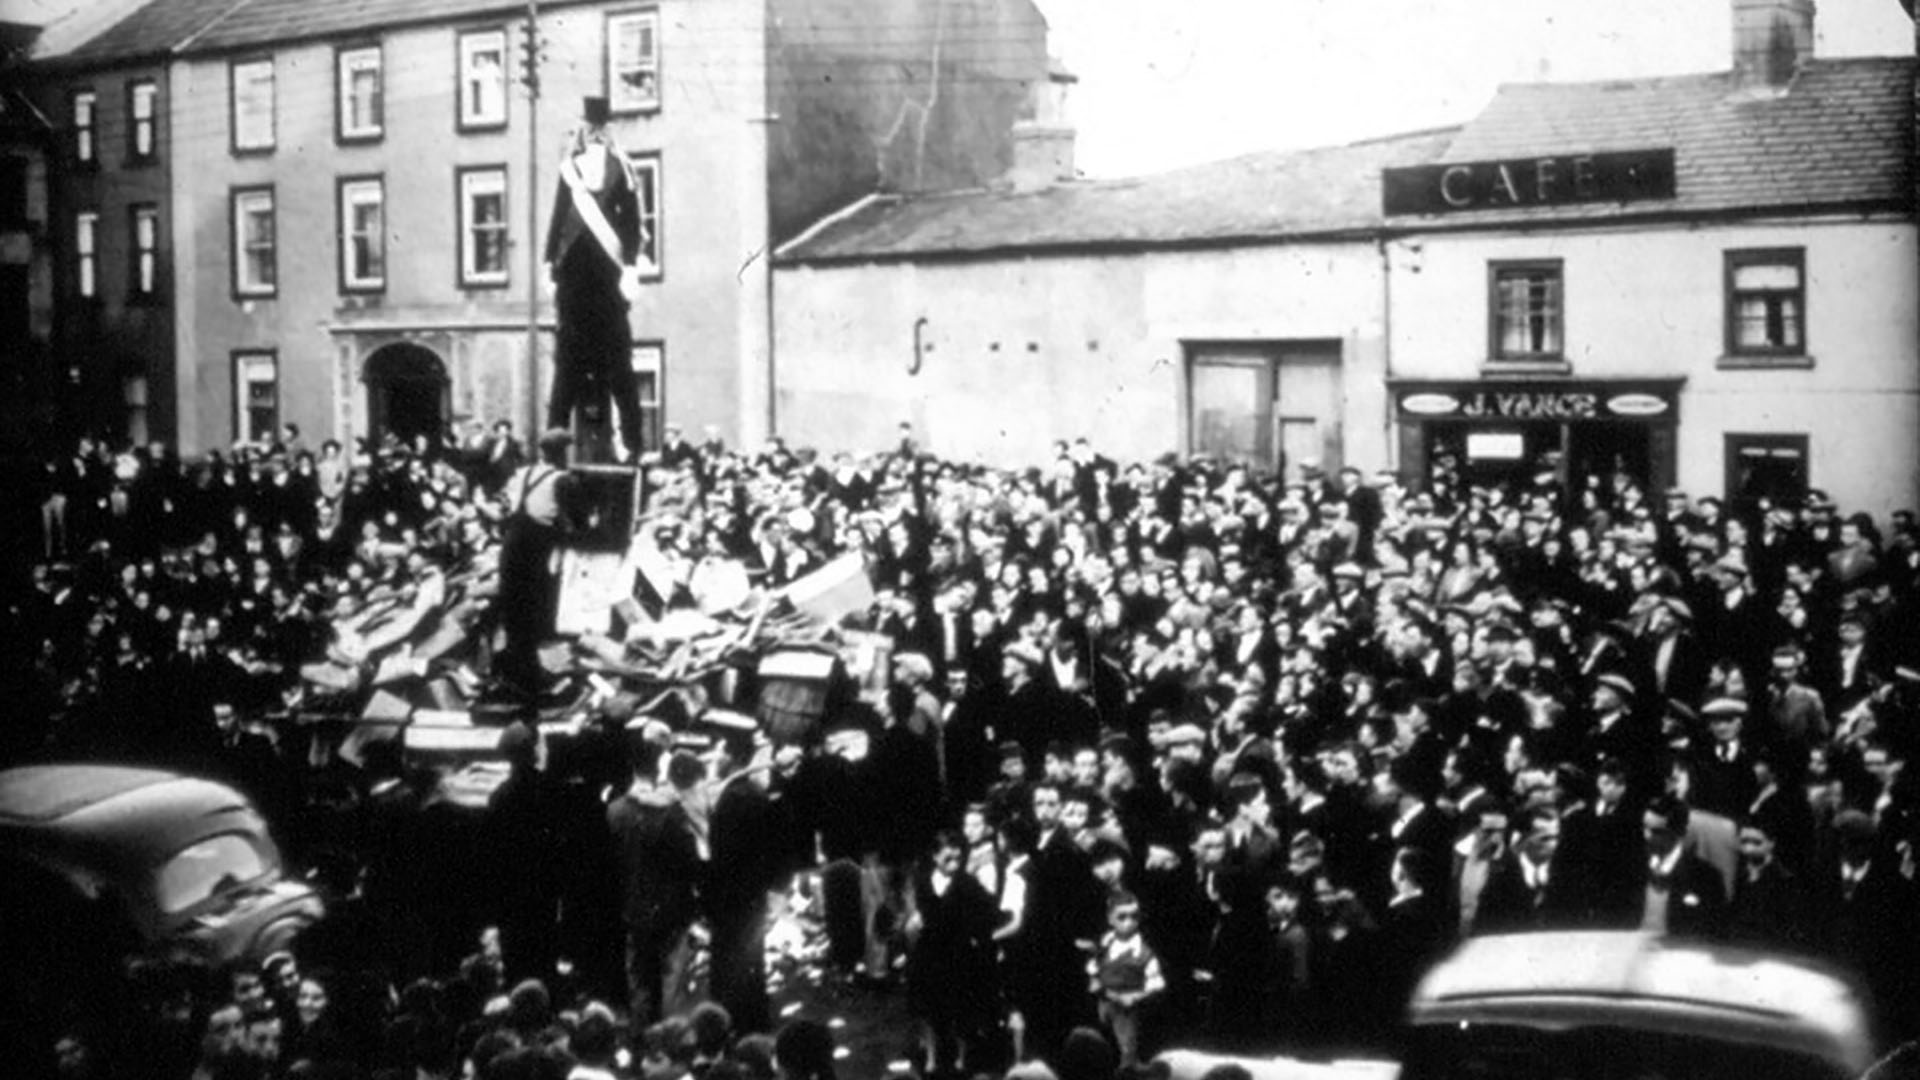 An effigy of Billy Lundy possibly carried by local man Billy Burns is placed on top of the 11th July bonfire at the junction of Bridge Street and Carrickblacker Road in Edenderry, Portadown, Co. Armagh.